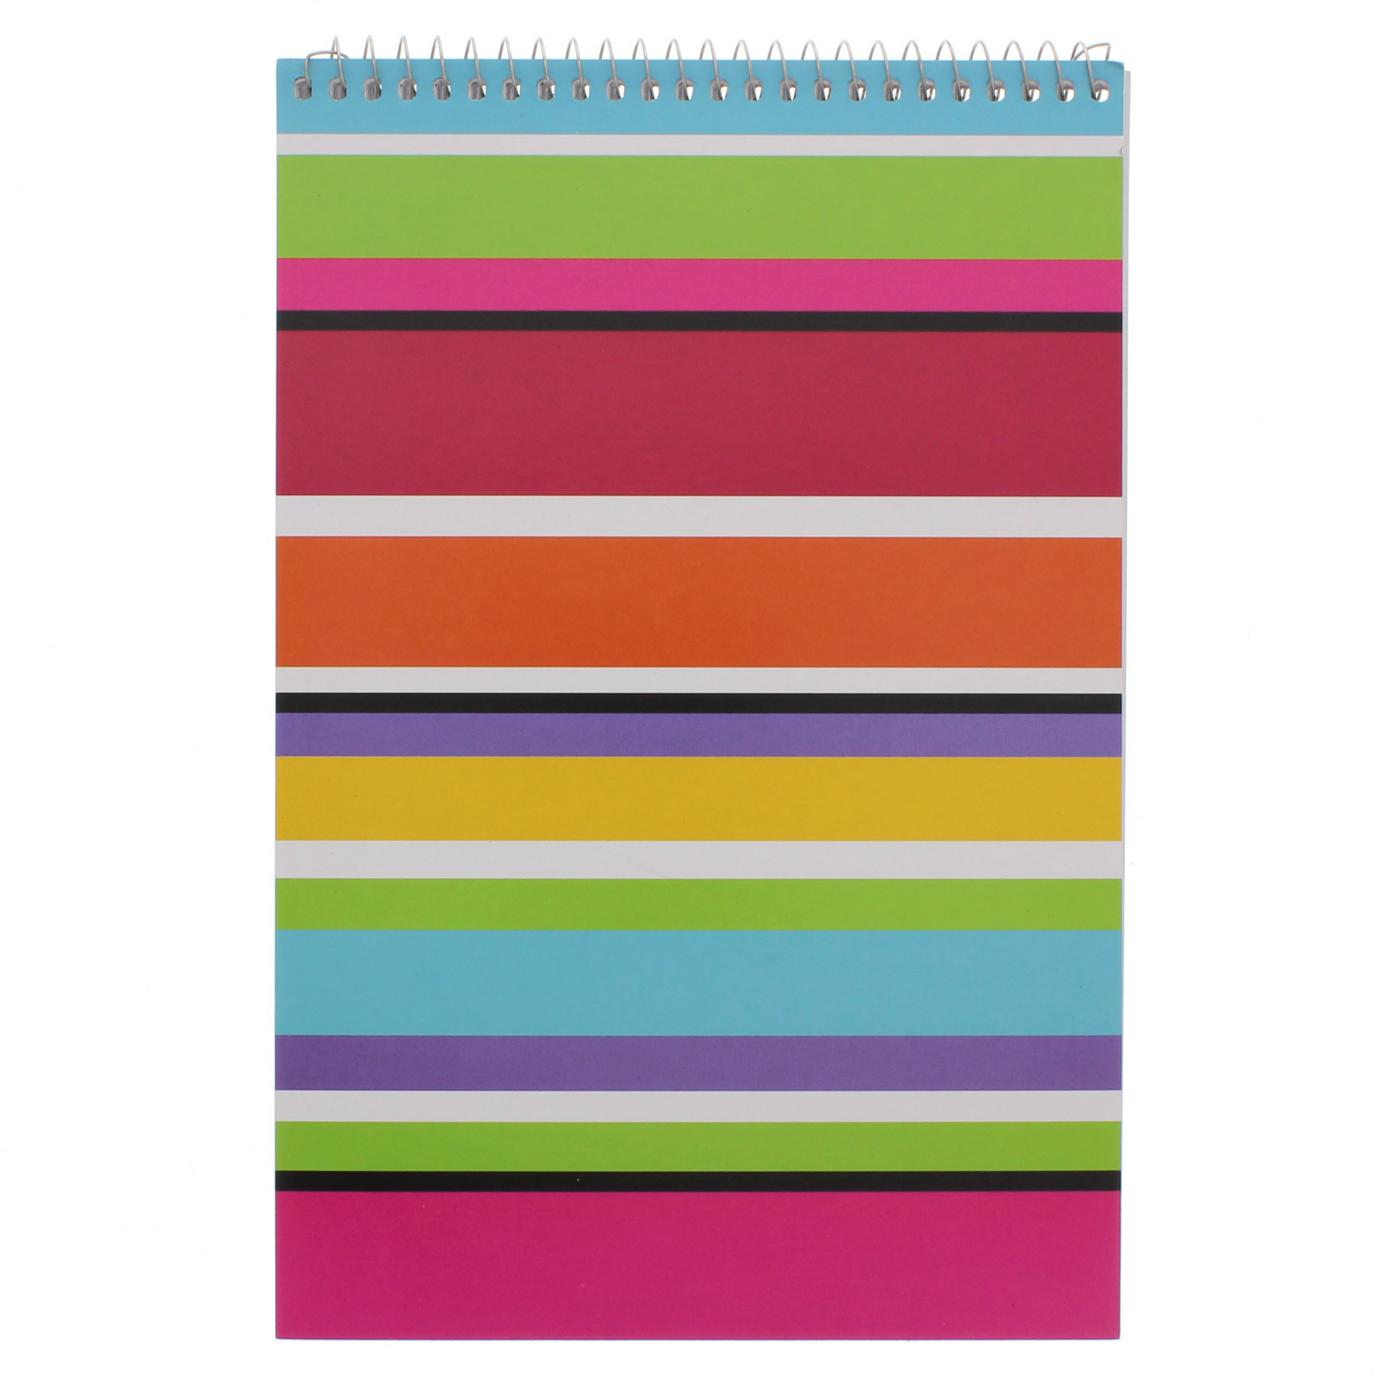 CPP International 6" x 9" Fashion Steno Notebook, Colors & Designs May Vary; image 3 of 3